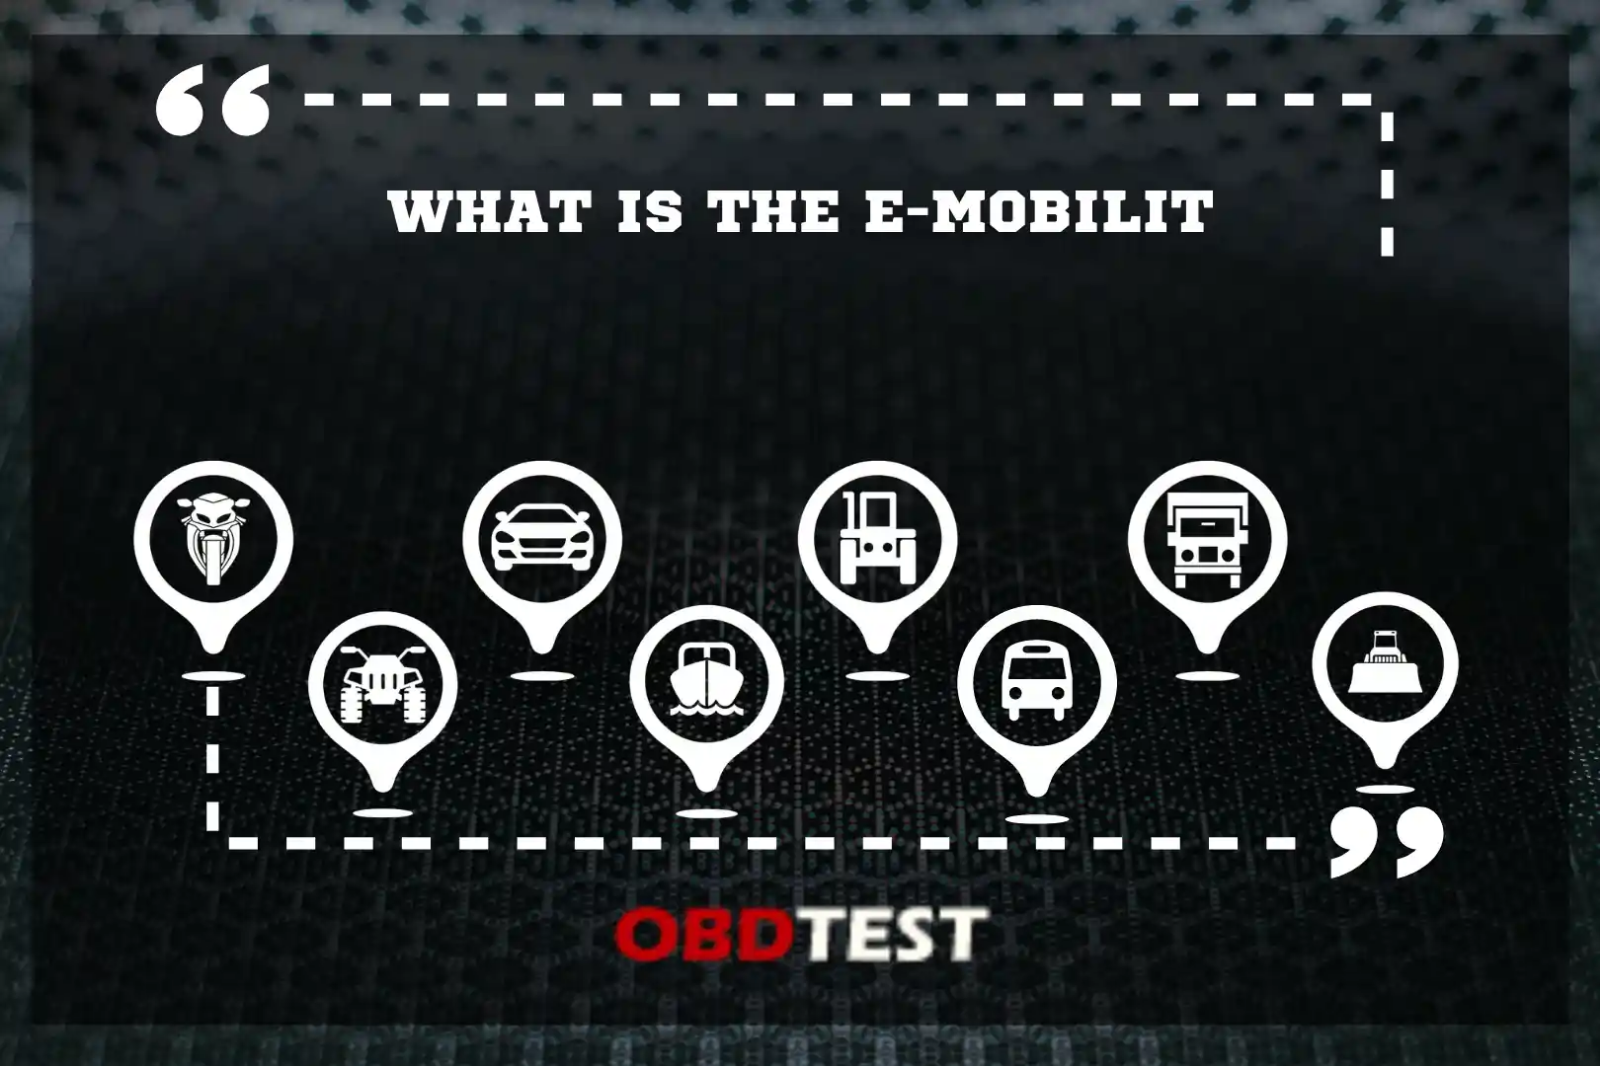 What is the e-mobility?